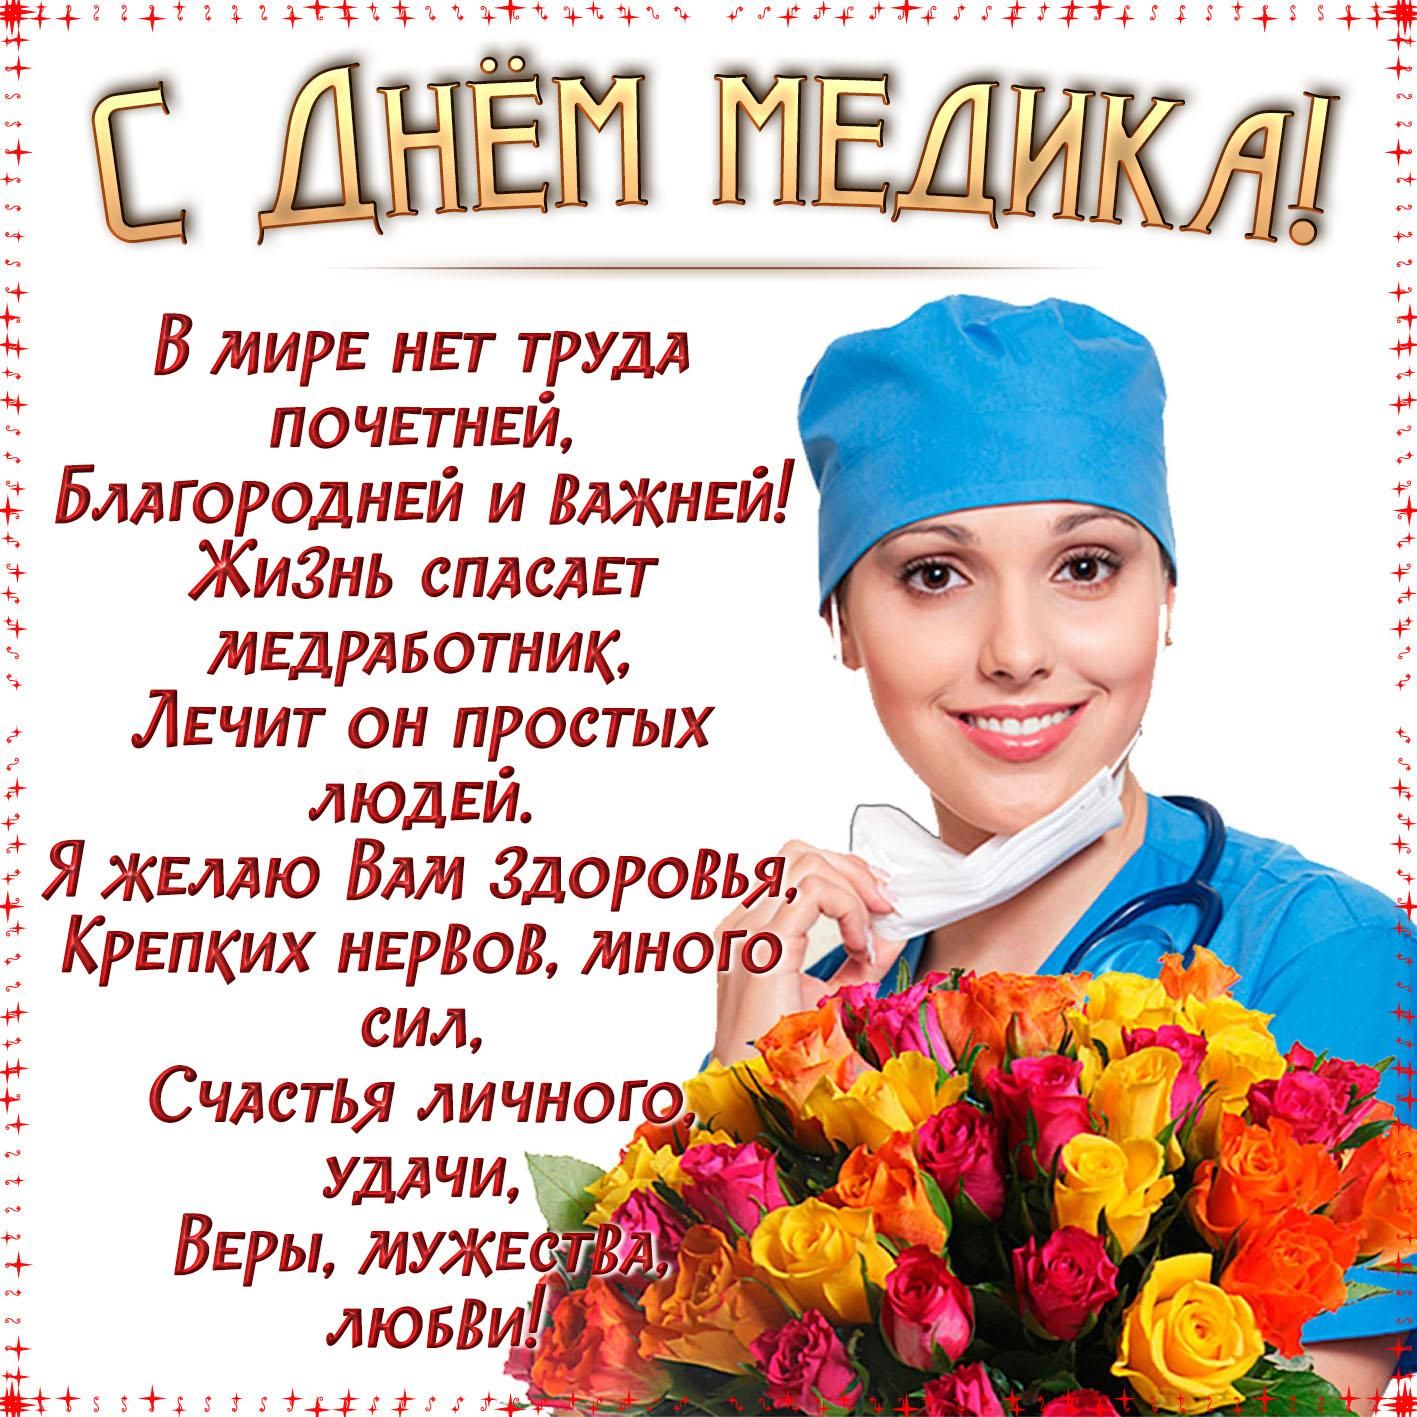 Photo International Doctor's Day October 3, 2022: cool postcards and congratulations in verse to doctors 11